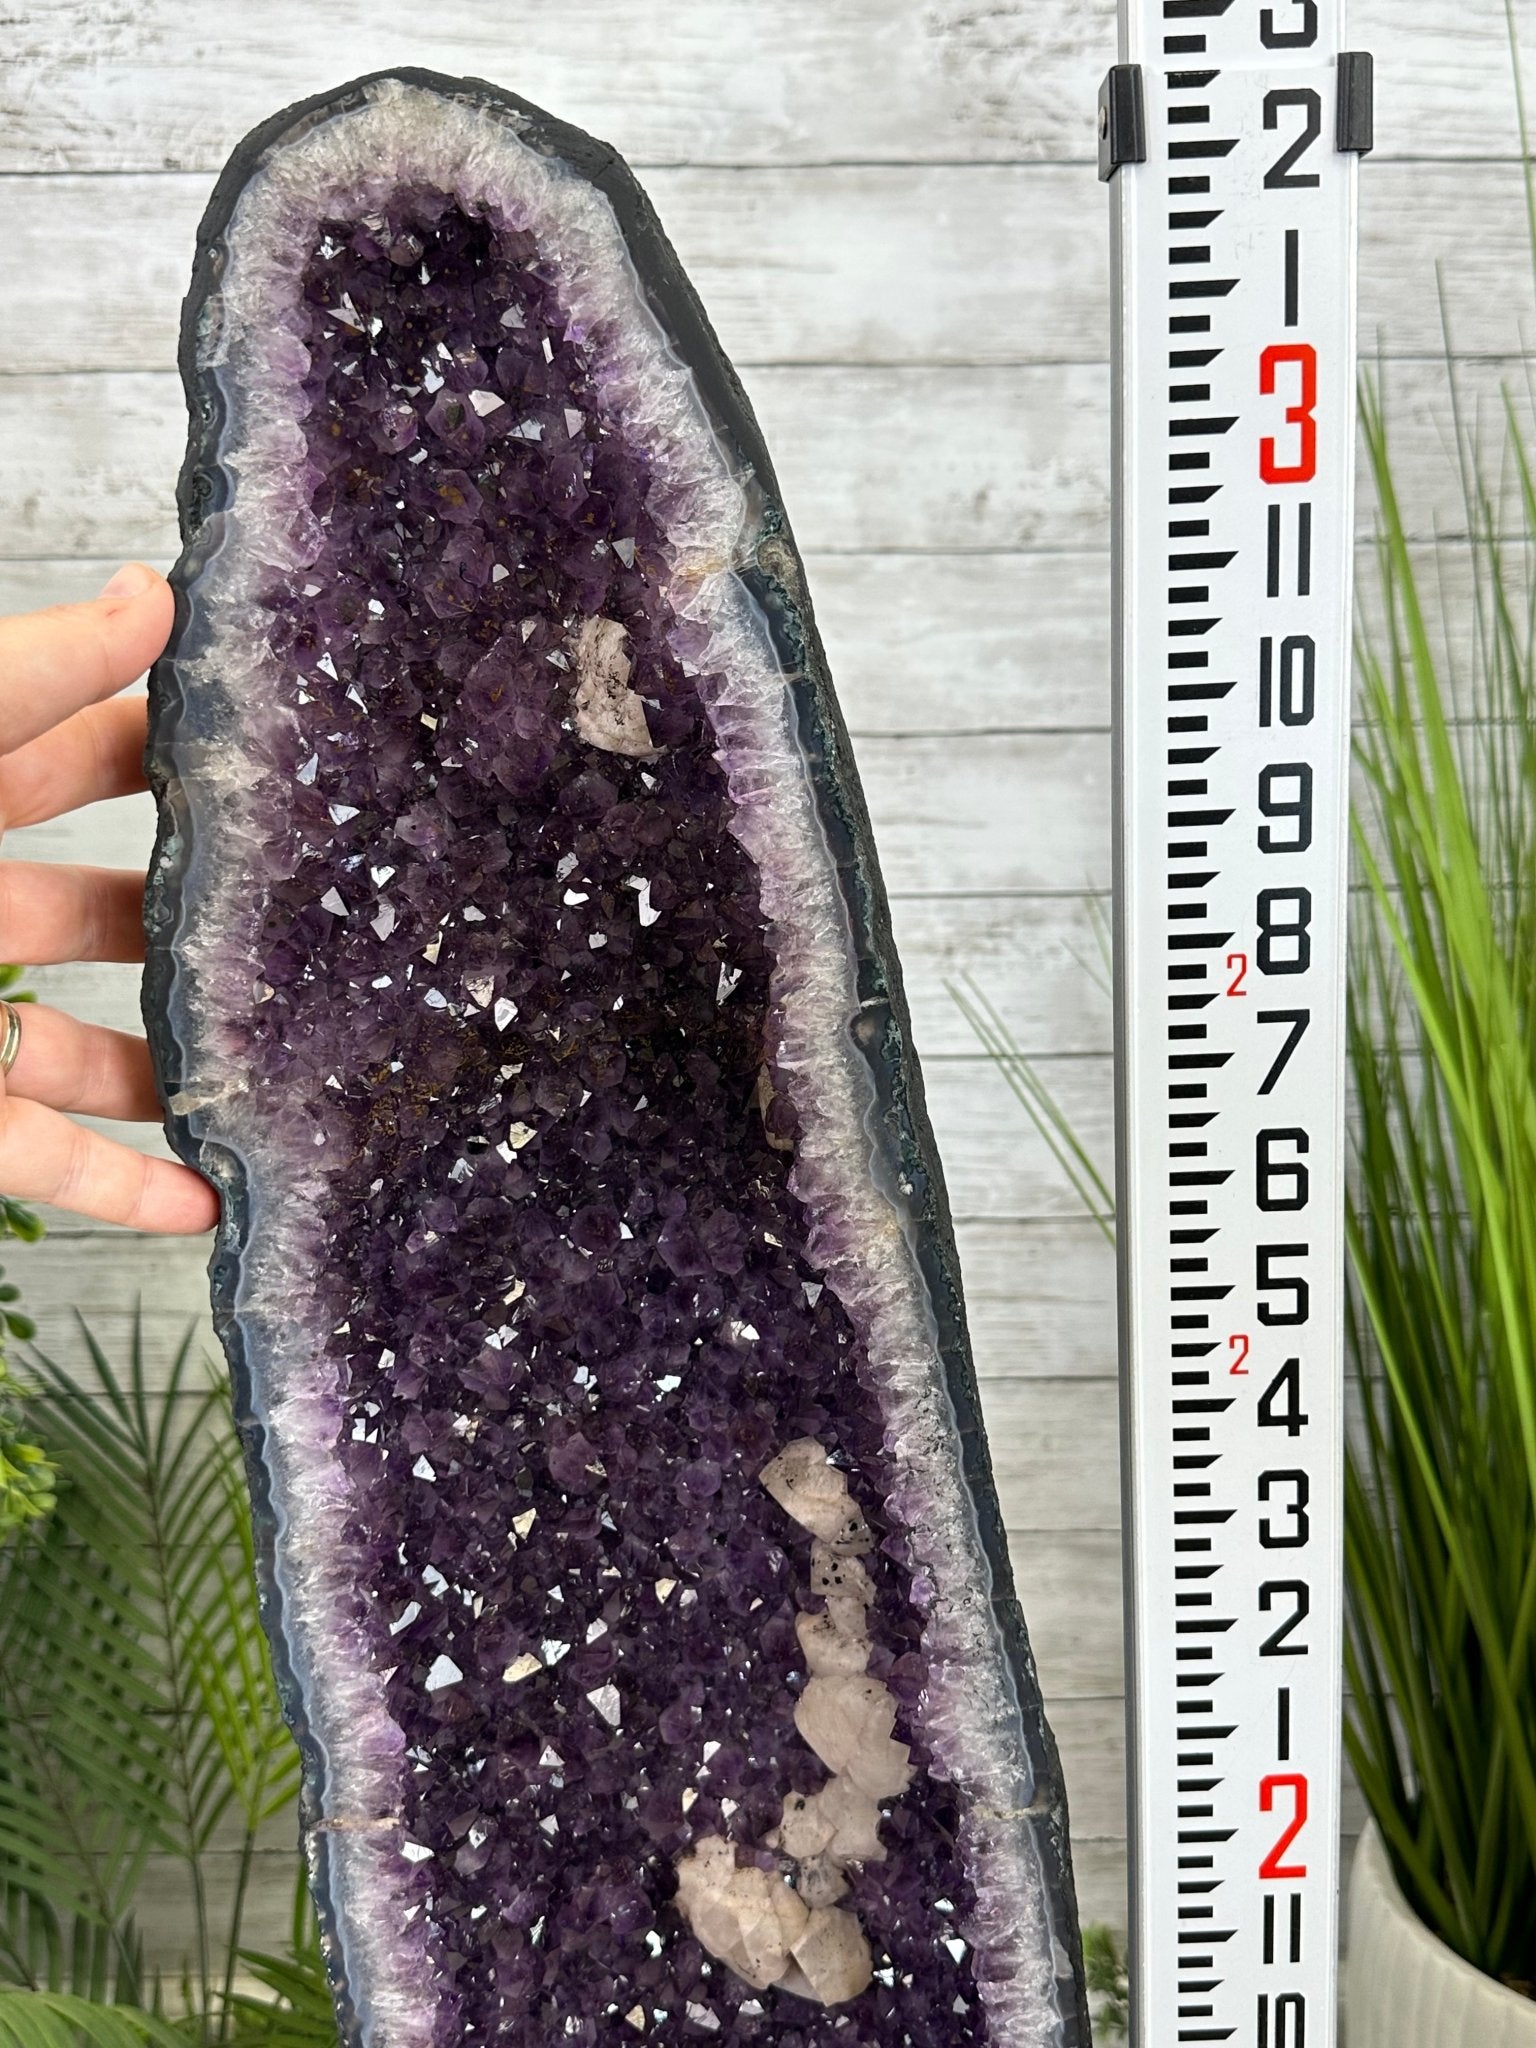 Extra Plus Quality Brazilian Amethyst Cathedral, 76.4 lbs & 38.5" Tall, Model #5601-1230 by Brazil Gems - Brazil GemsBrazil GemsExtra Plus Quality Brazilian Amethyst Cathedral, 76.4 lbs & 38.5" Tall, Model #5601-1230 by Brazil GemsCathedrals5601-1230